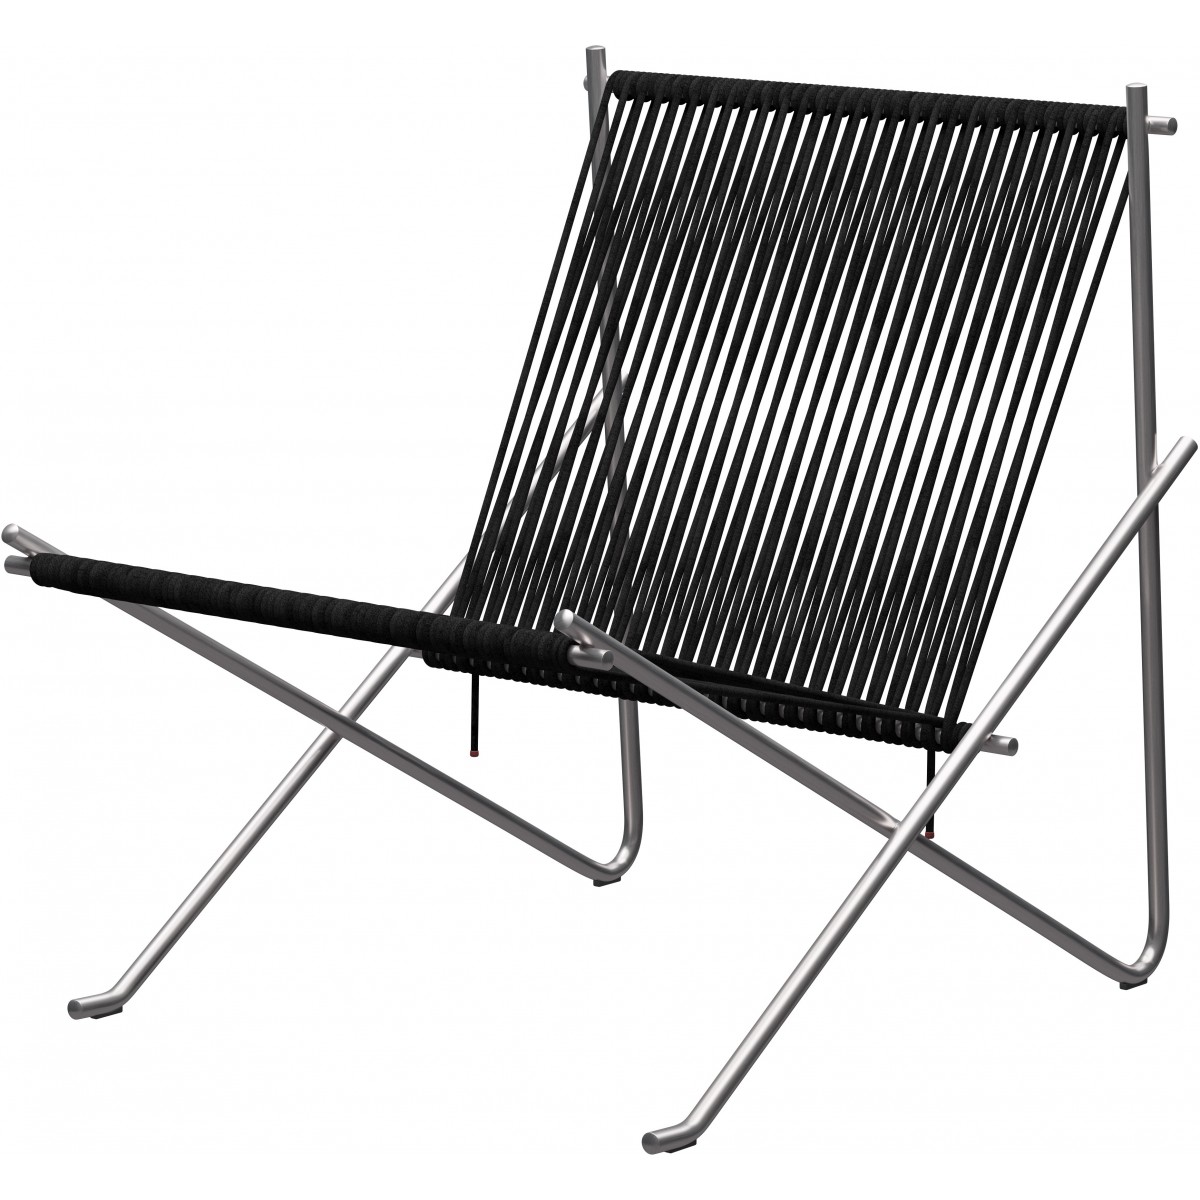 Lounge – PK4 Brushed chair steel stainless Black +